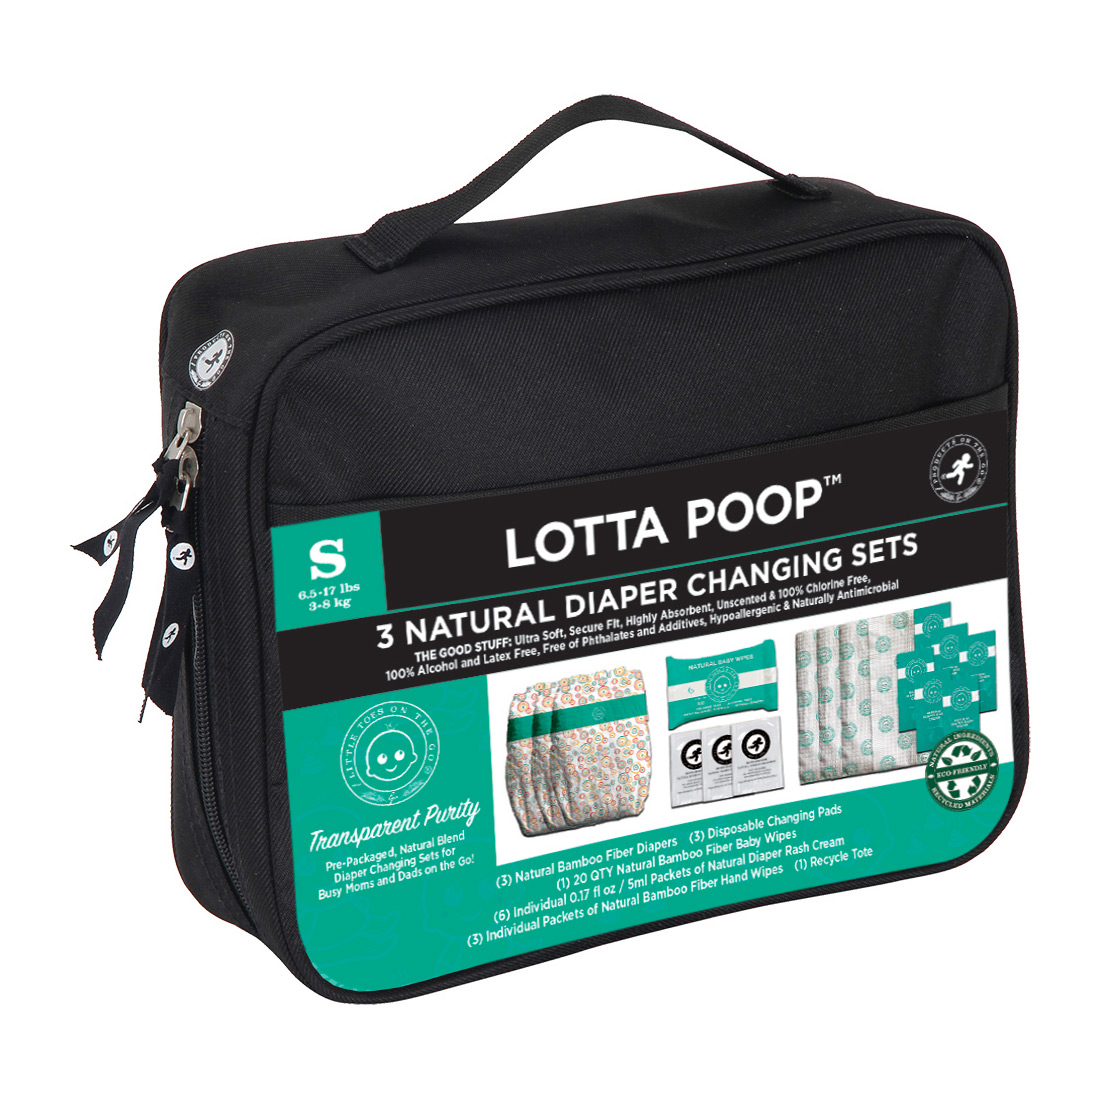 Potg1001 Lotta Poop 3 Complete Diaper Change Sets Fabric Case, Small